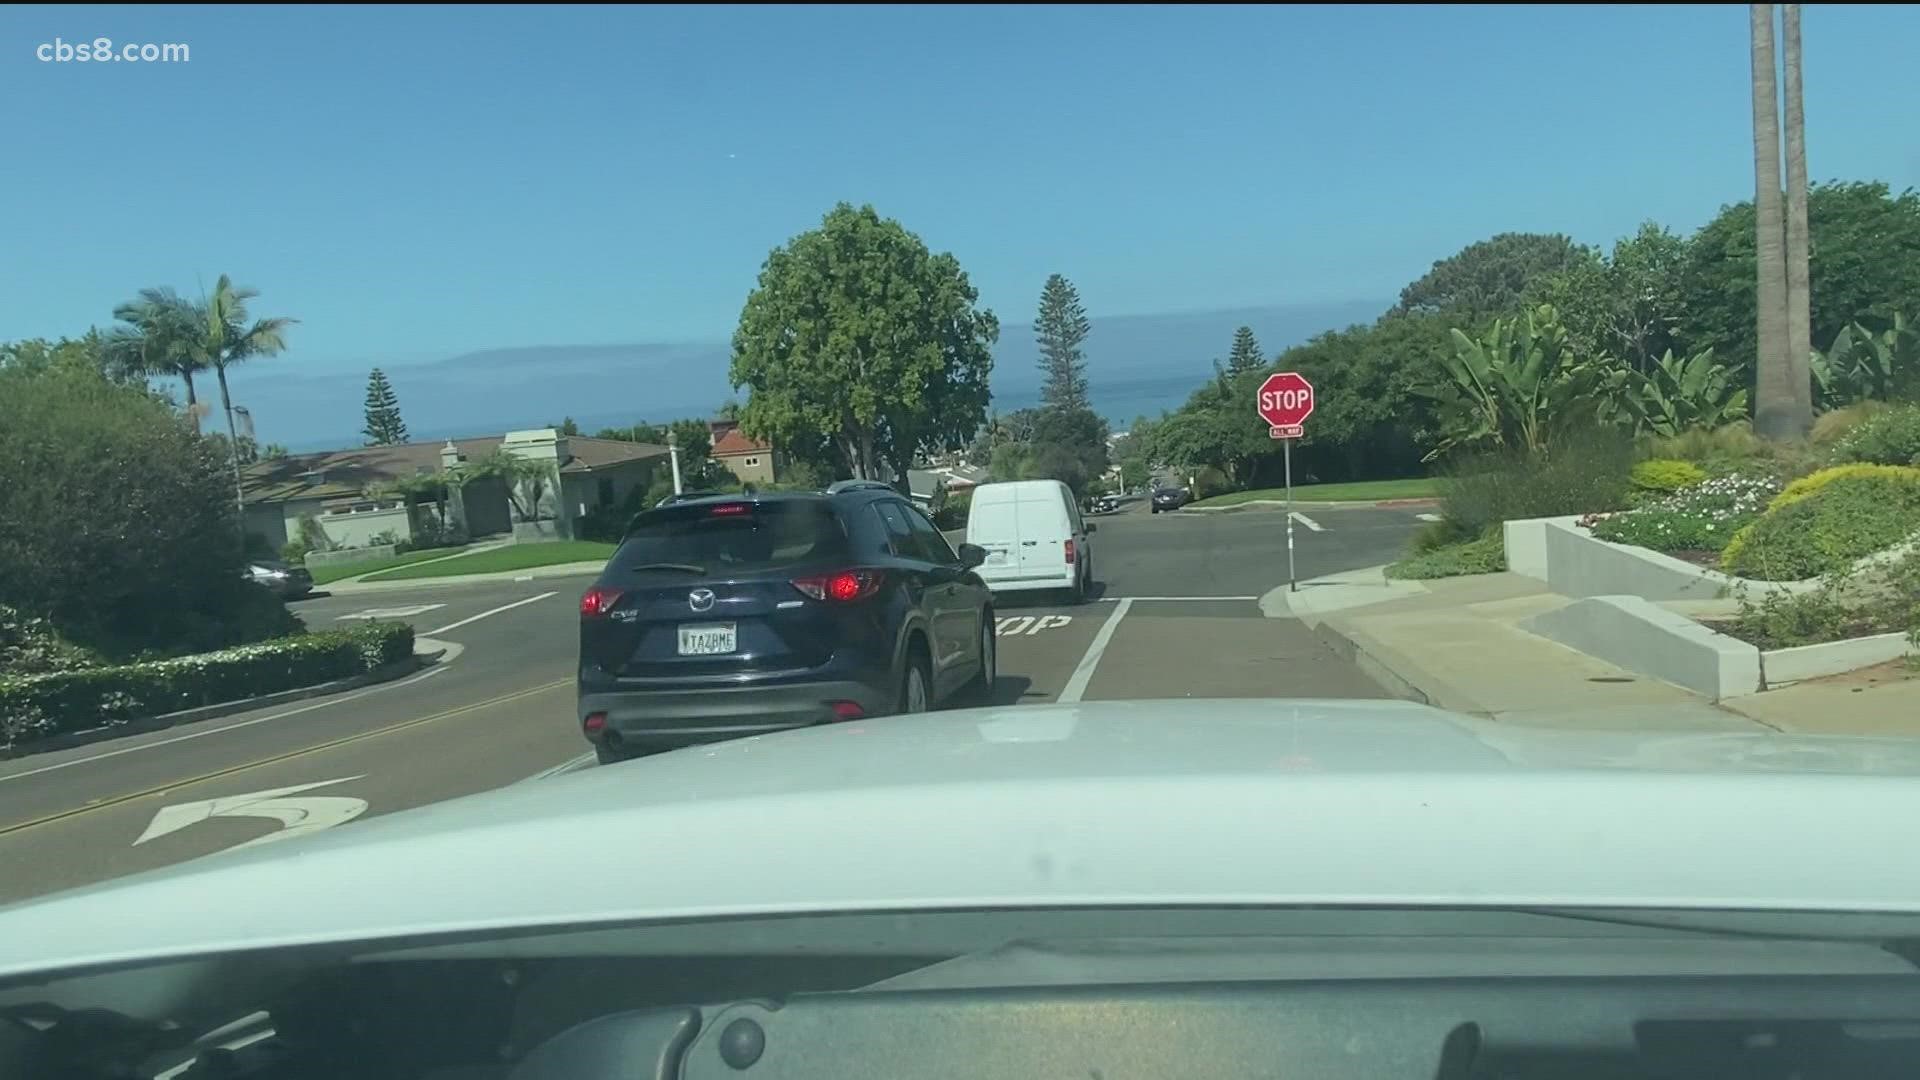 News 8 went out in 2019 to hear neighbor concerns about the Point Loma Avenue and Santa Barbara Street intersection and they say the city still won't make changes.